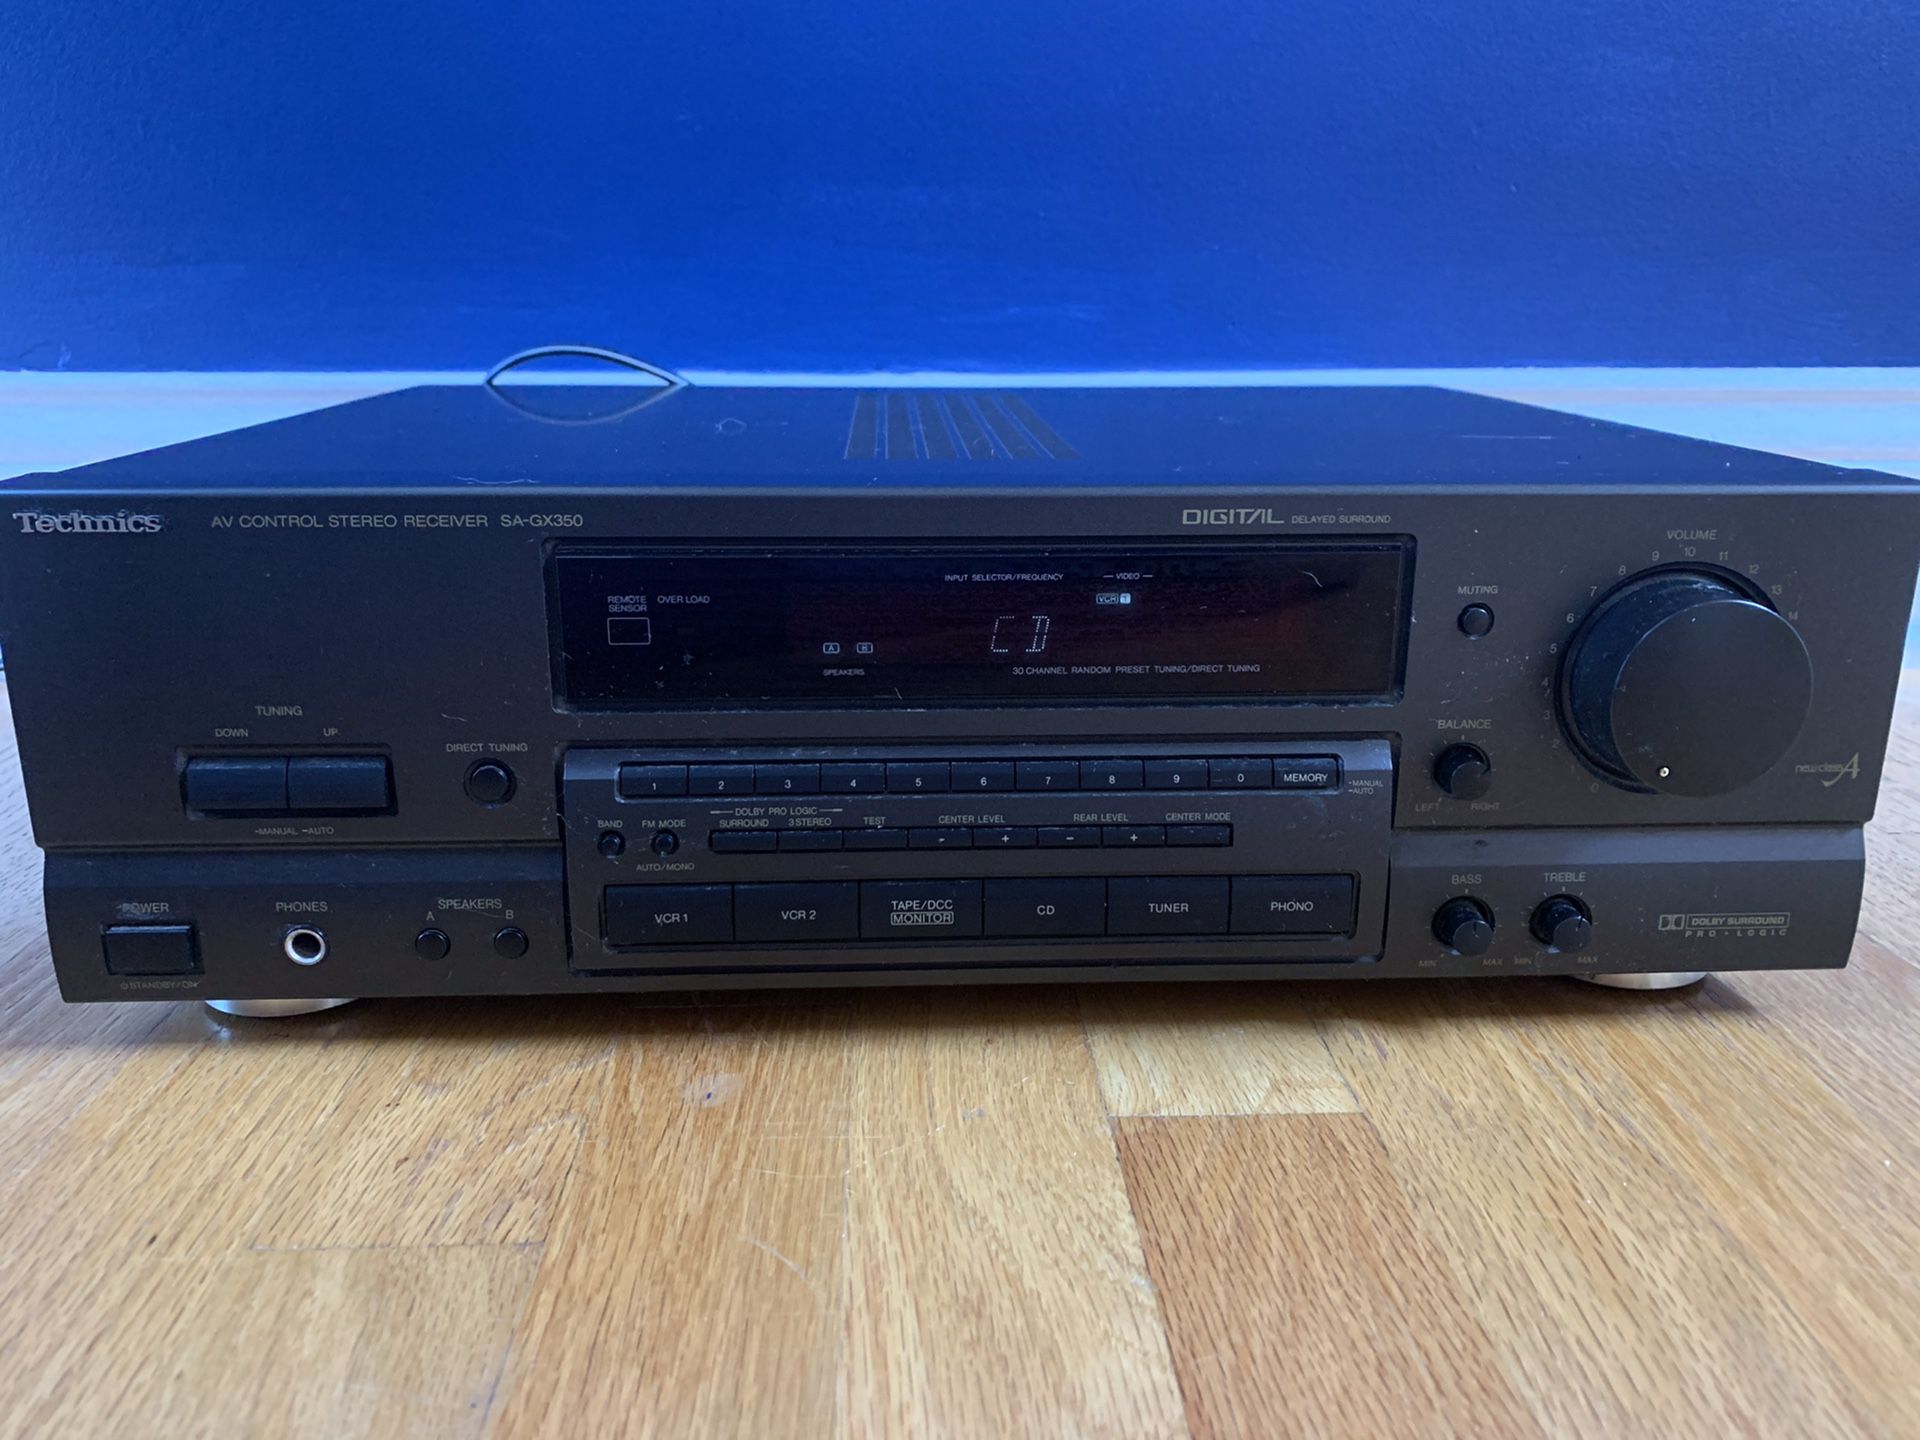 Technics SA-GX350 5.0 Home Theater Surround Sound Stereo Multizone Av Receiver Amplifier. Fan gets a little noisy when the volume is turned up loud.